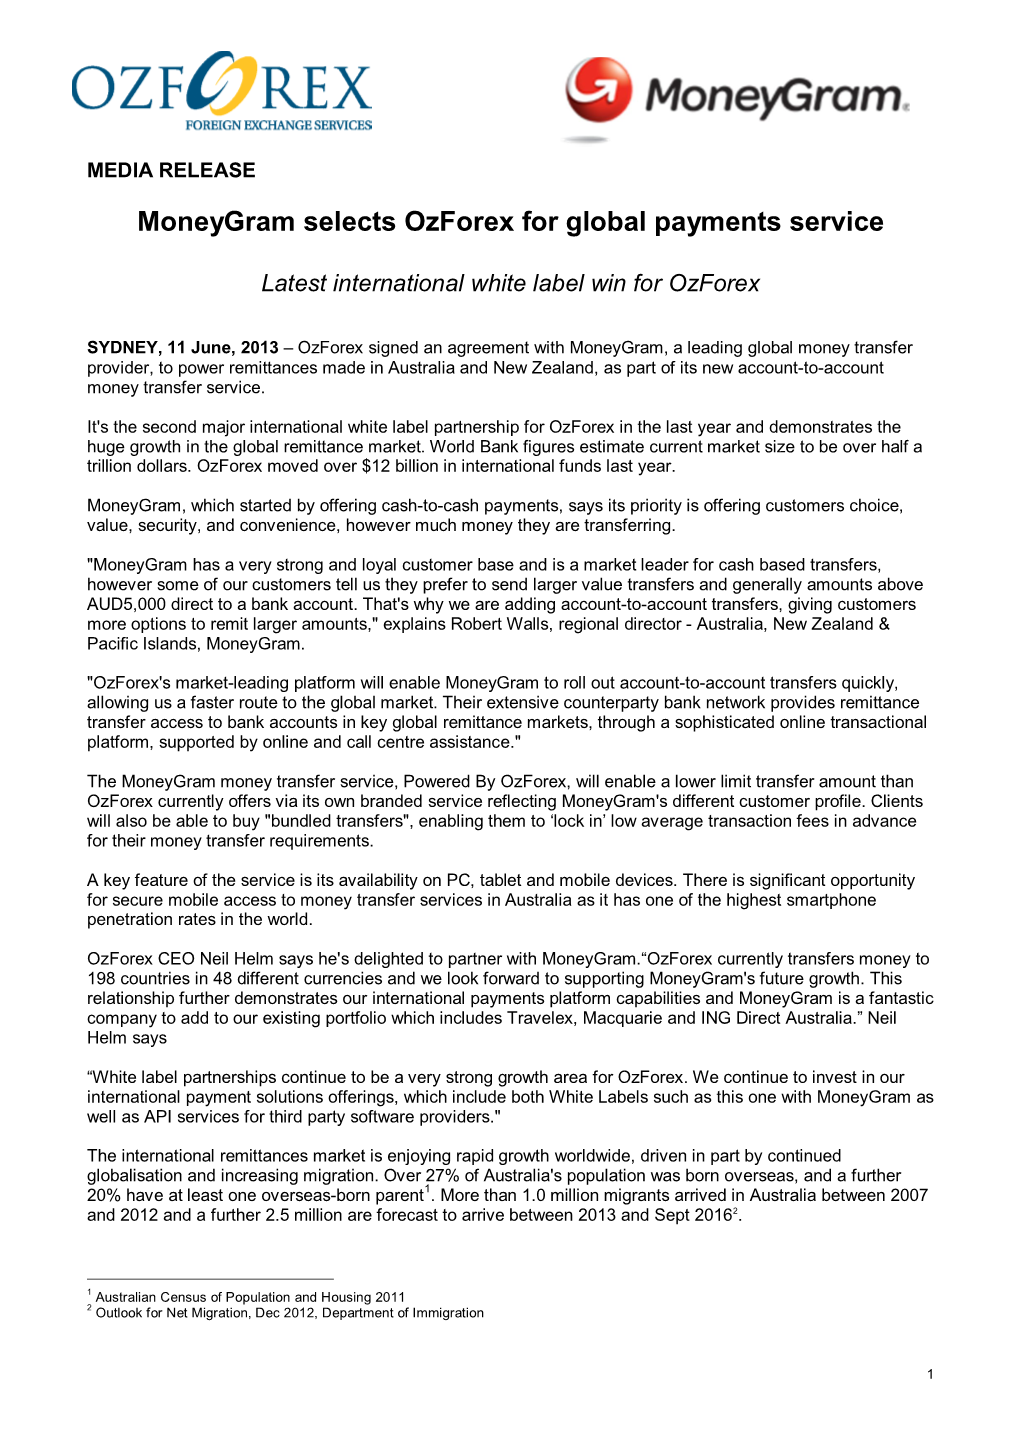 Moneygram Selects Ozforex for Global Payments Service